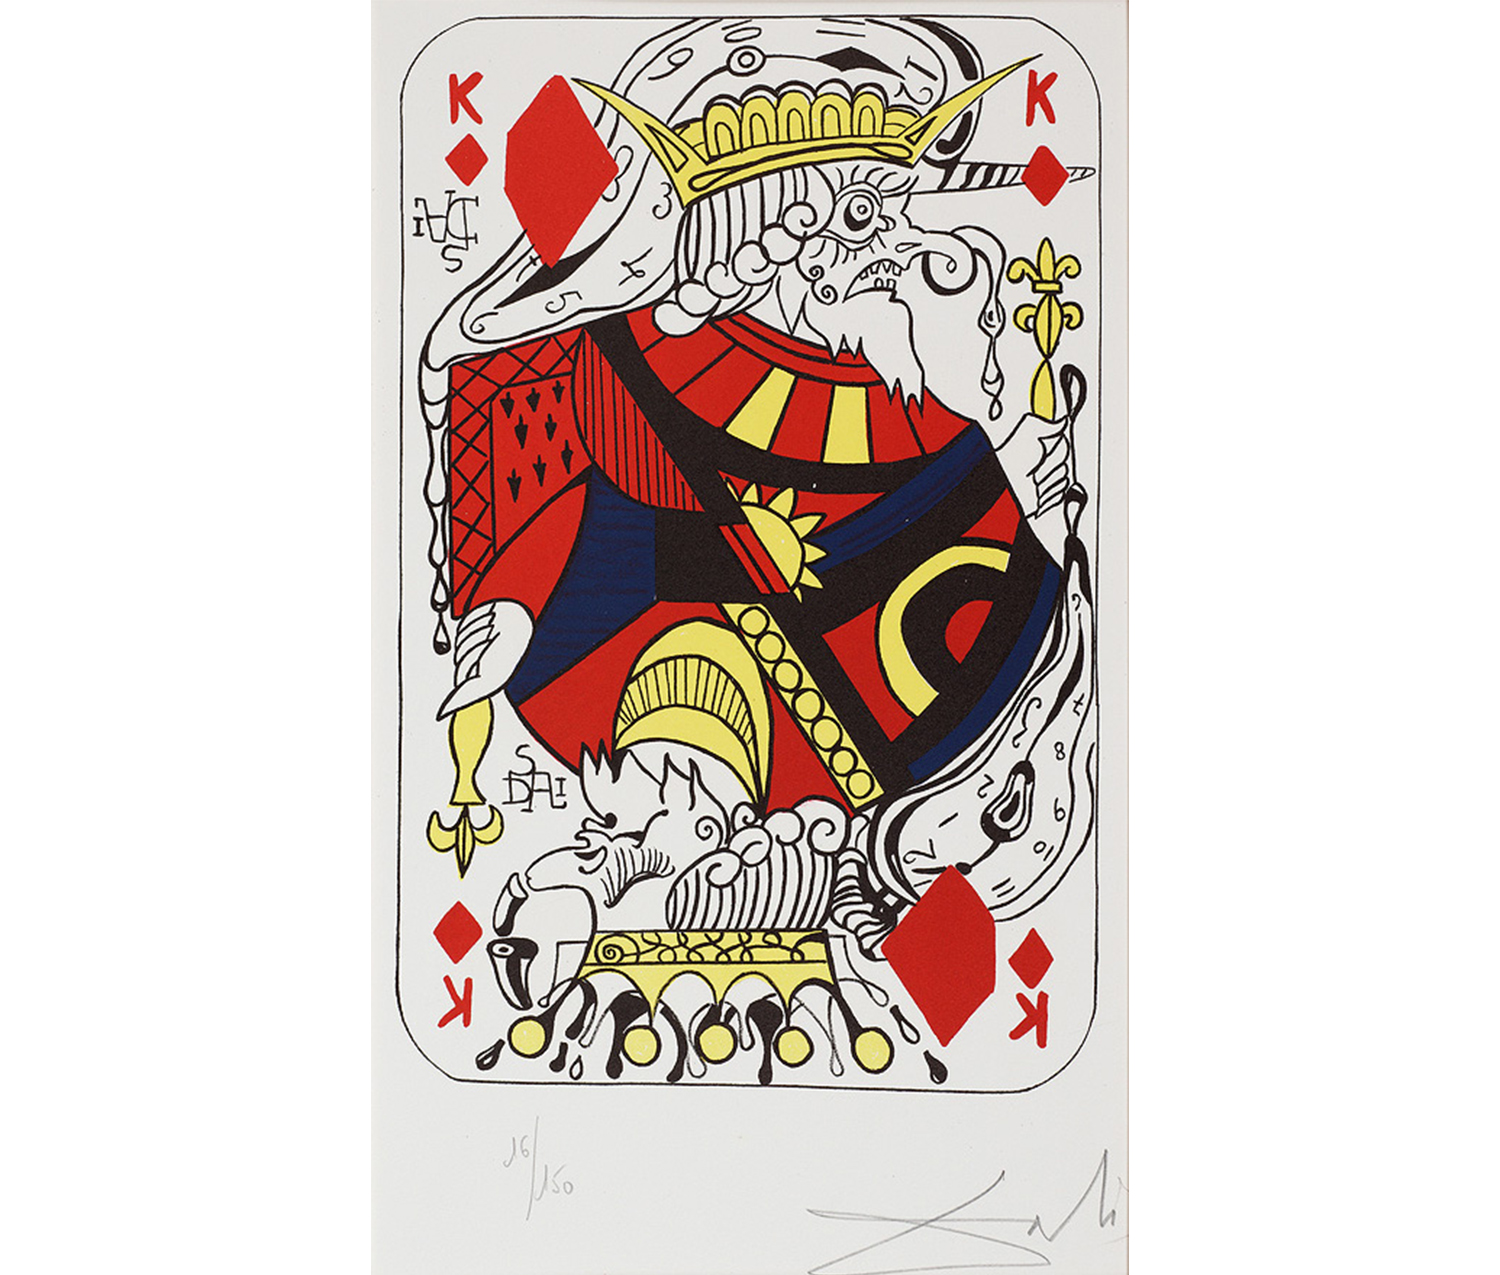 playing card featuring a profile view of a man wearing a red cloak and a yellow crown